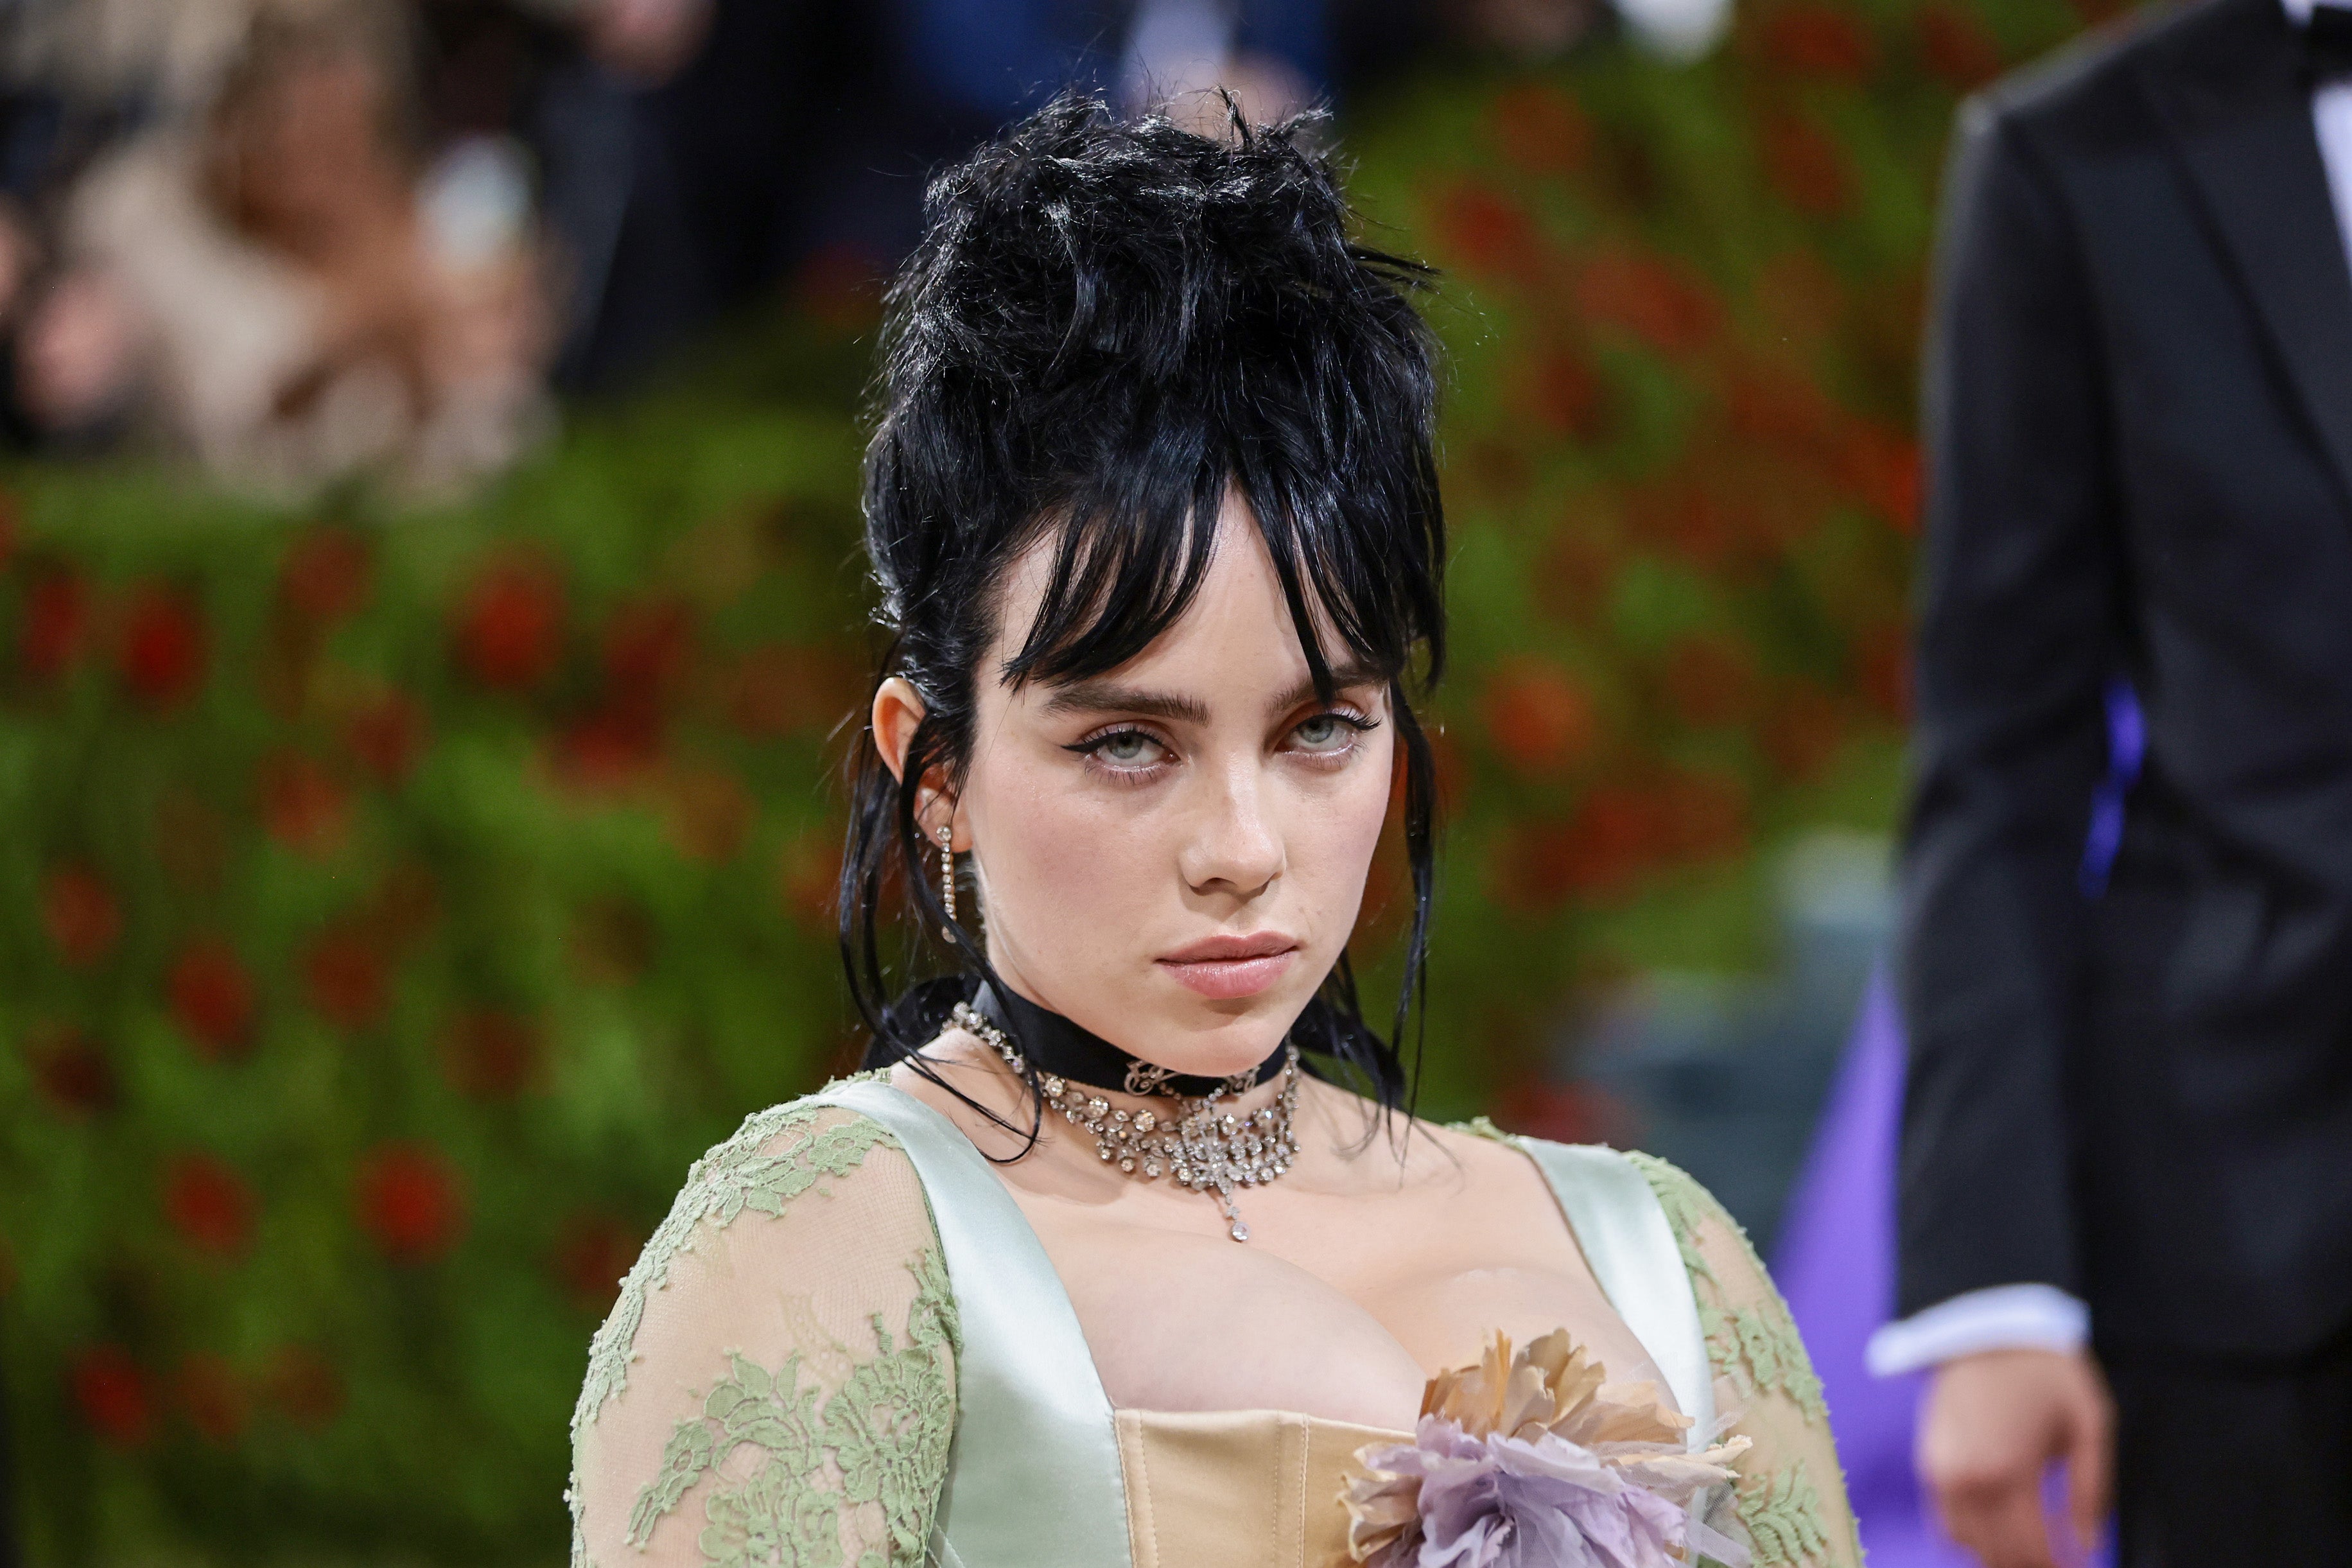 Billie Eilish reveals she slept in same bed as brother and parents